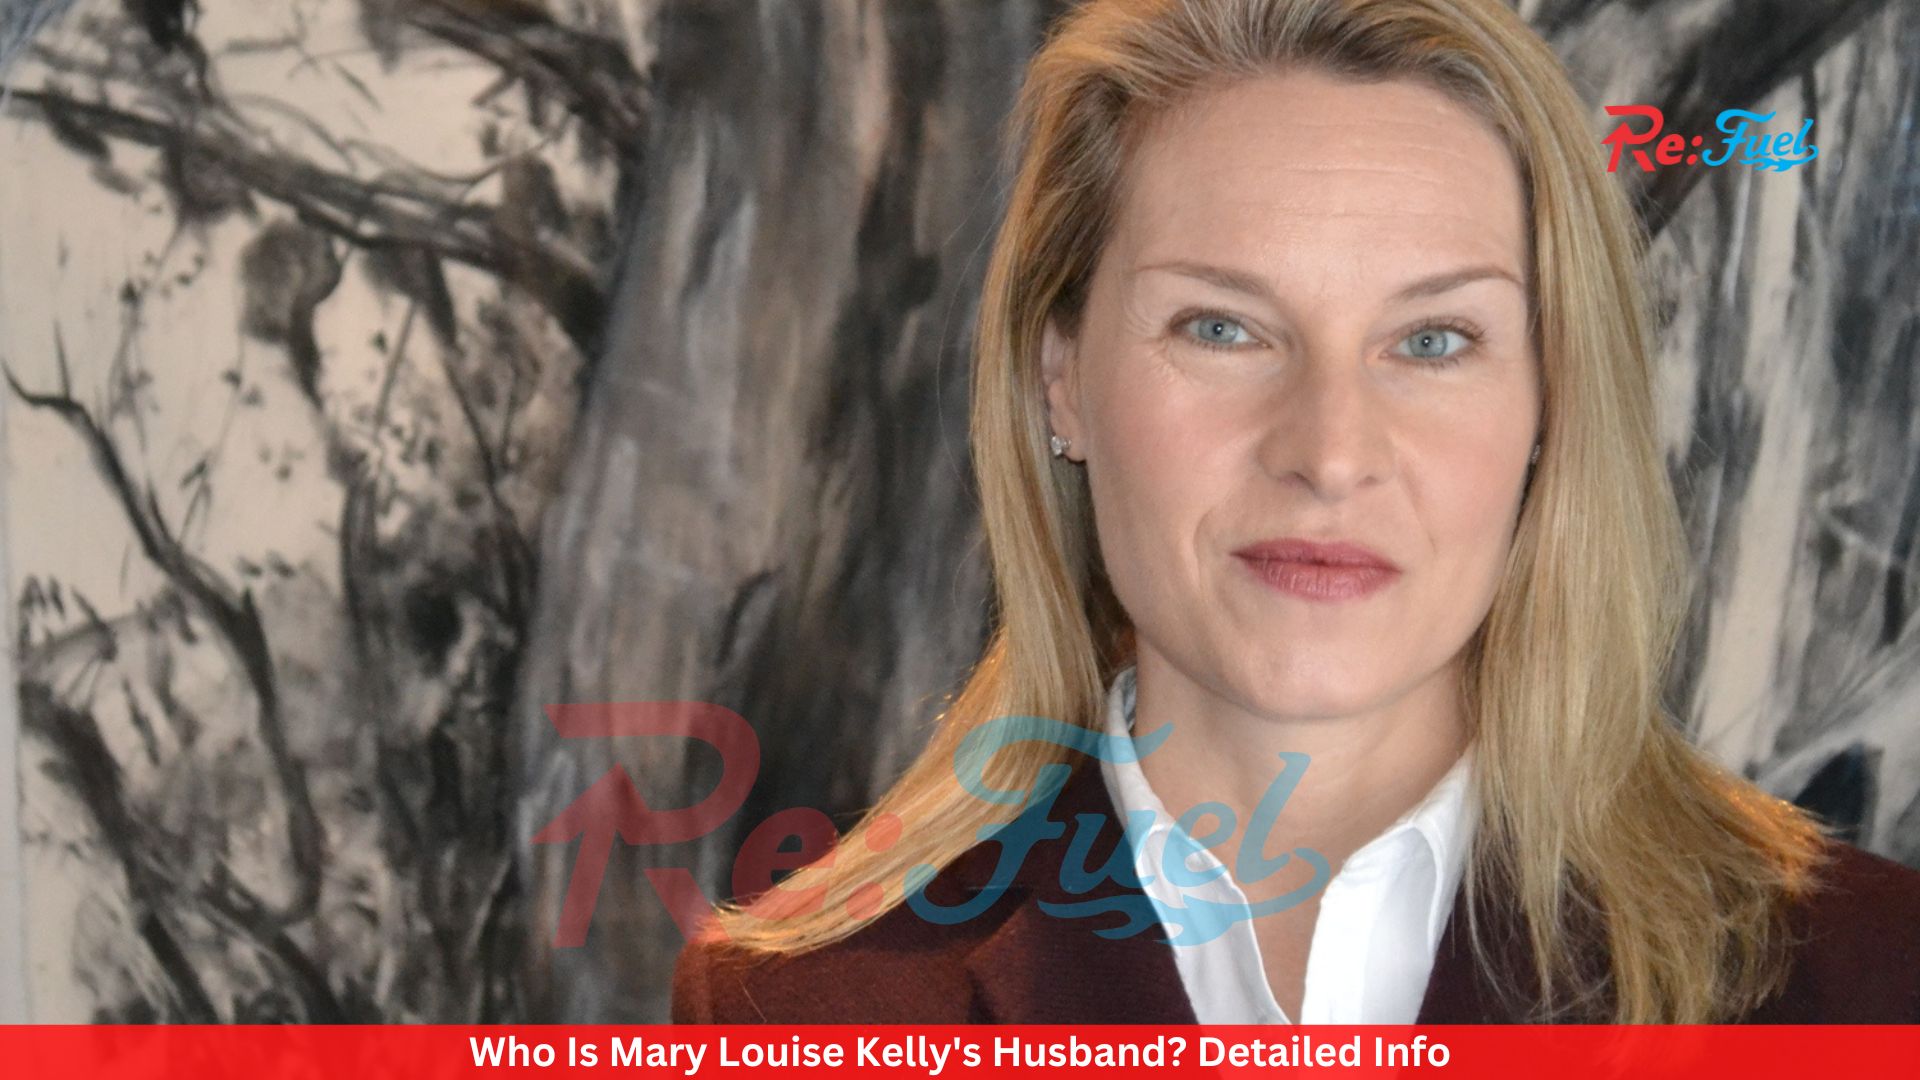 Who Is Mary Louise Kelly's Husband? Detailed Info